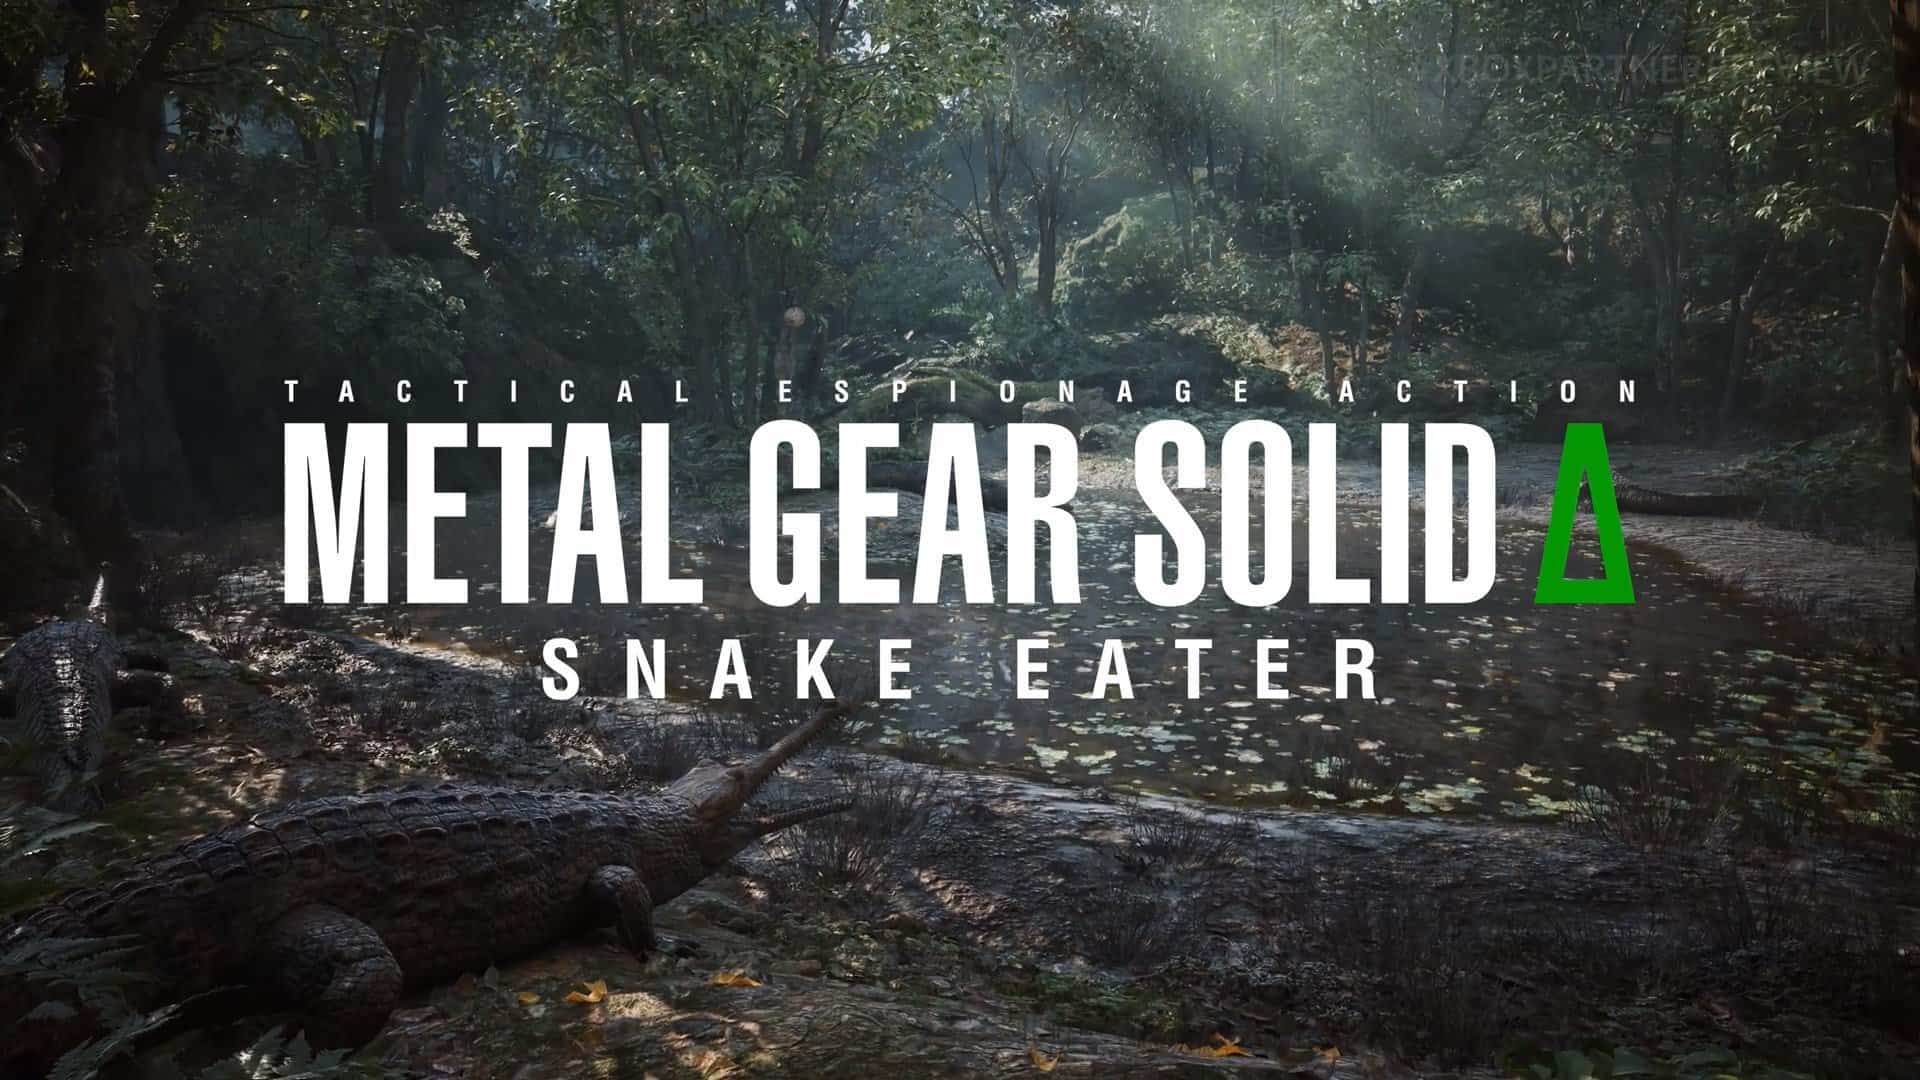 Metal Gear Solid Delta: Snake Eater Looks Great Compared to the